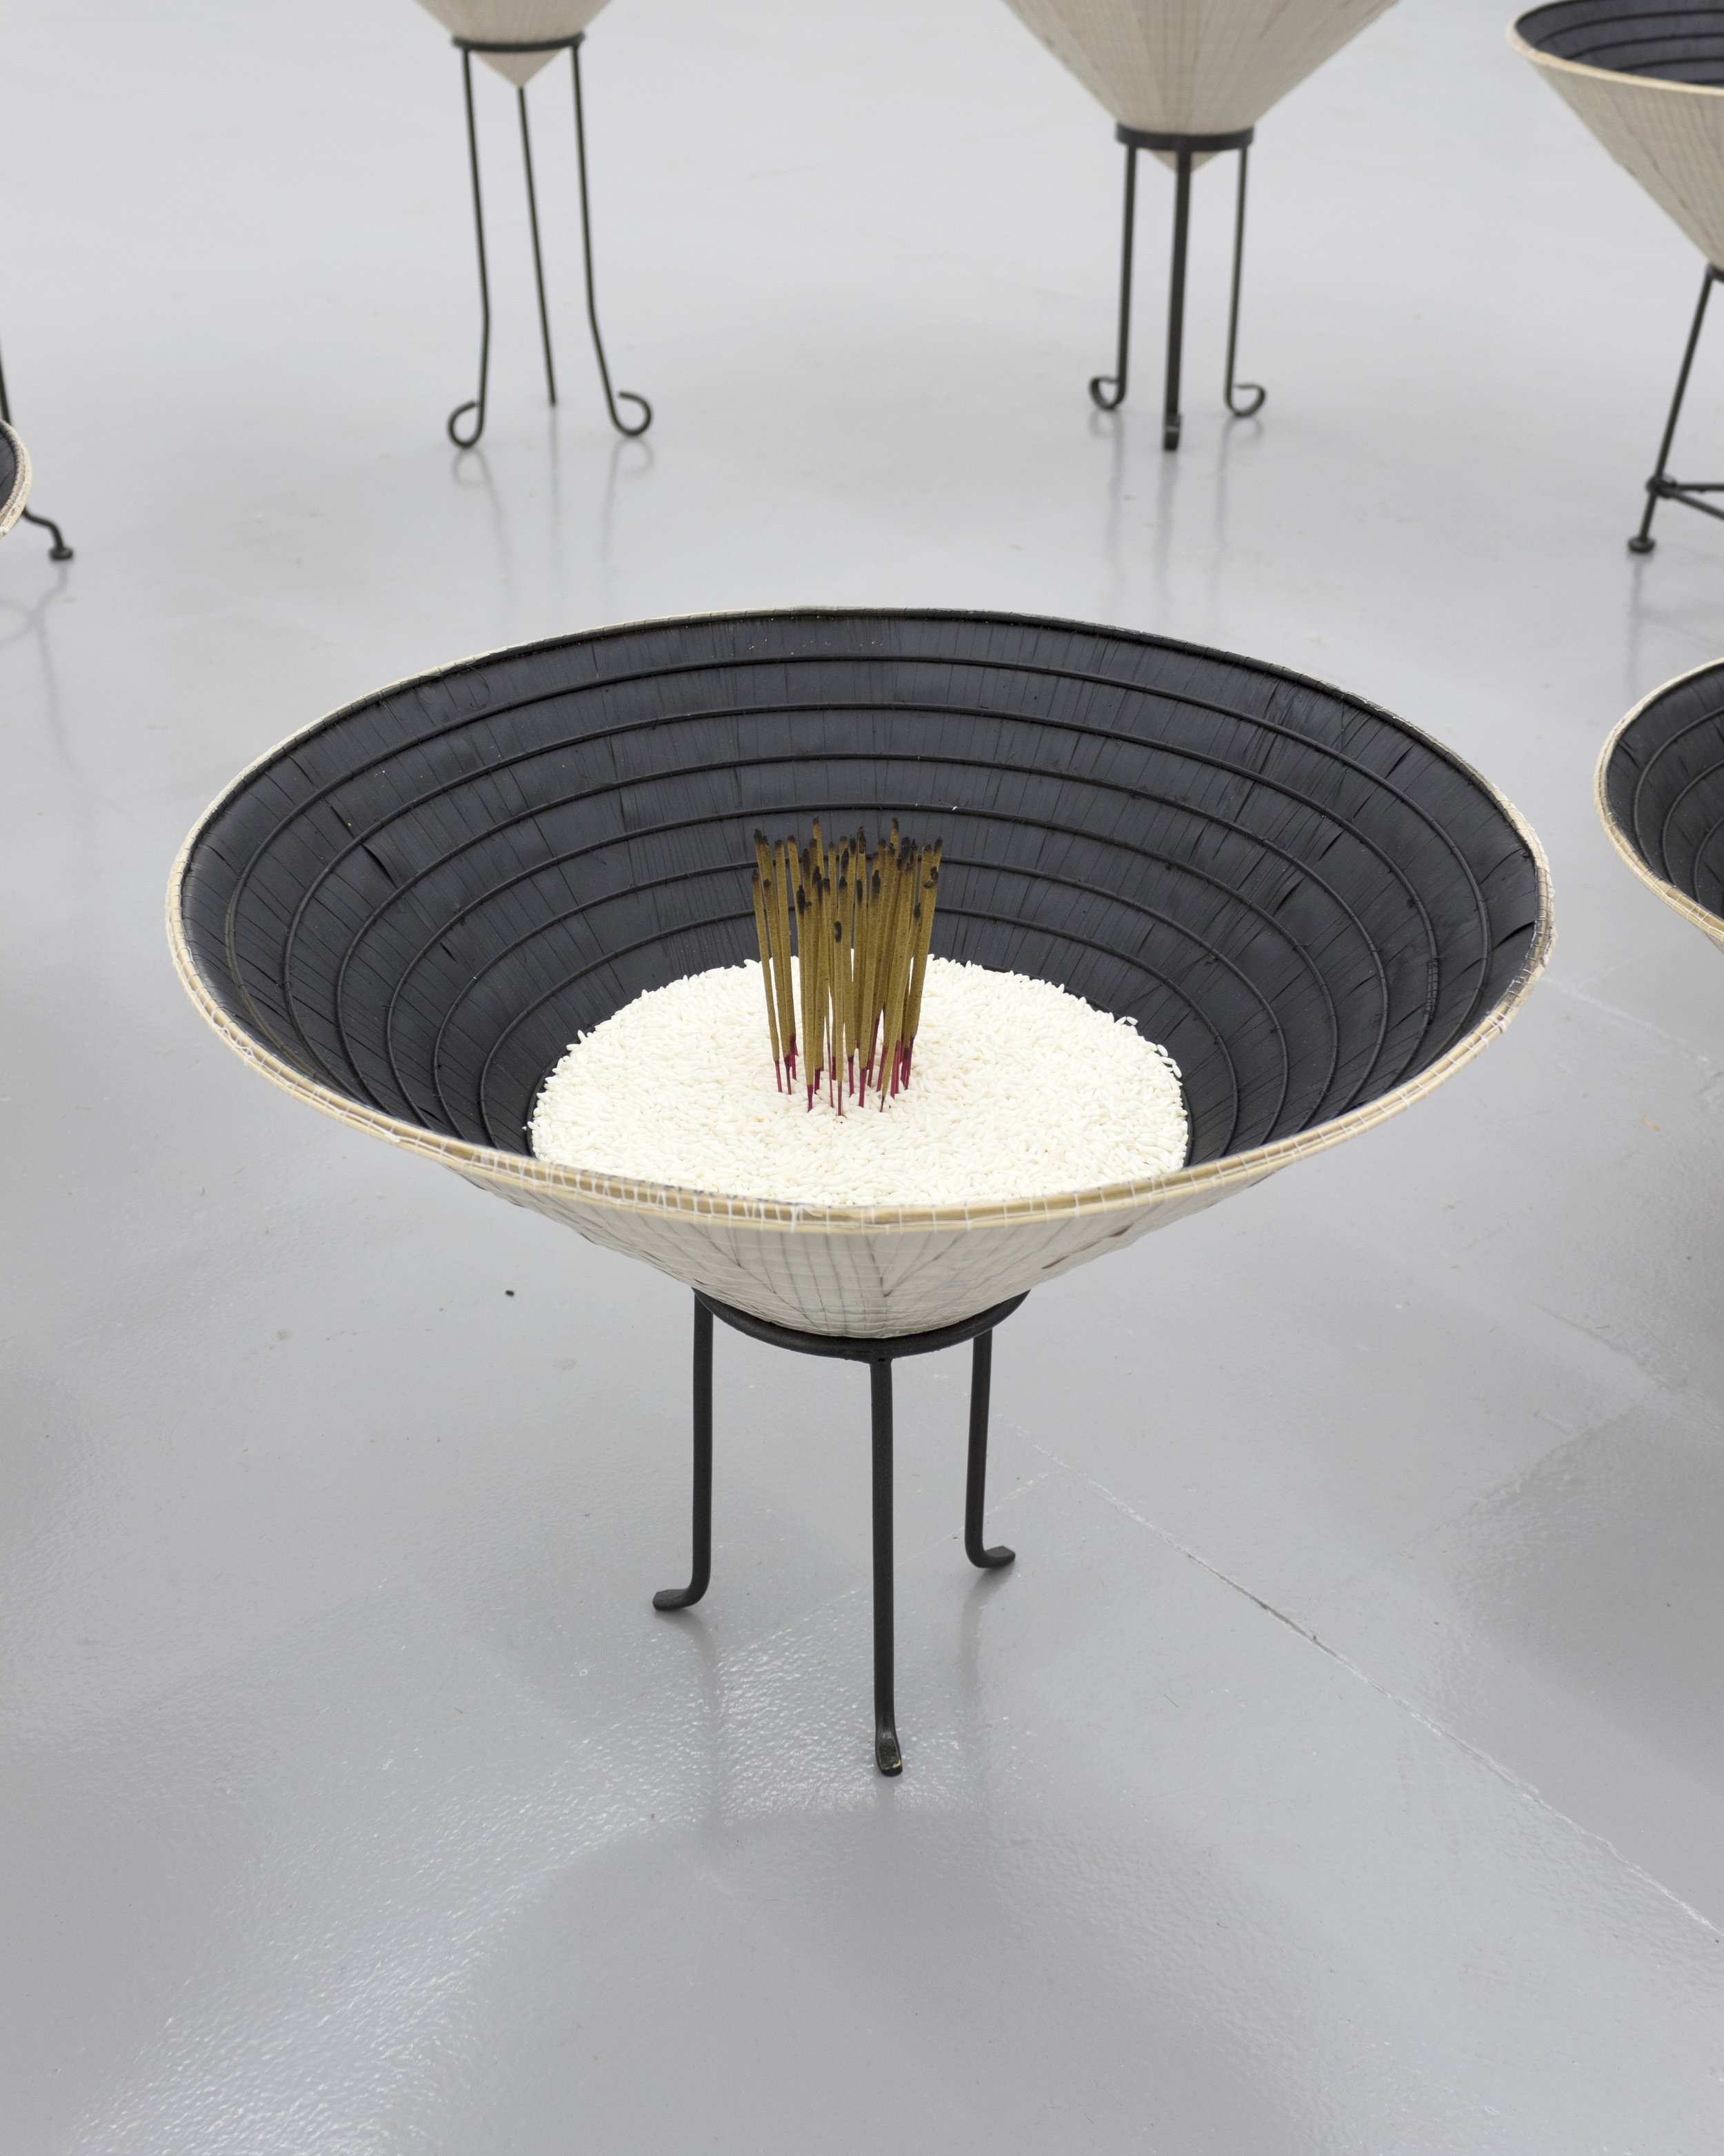  Millian Giang Lien Pham,  Reforge: 9 Phases (Nine),  2019. Conical hat, sweet rice, incense, metal stand 